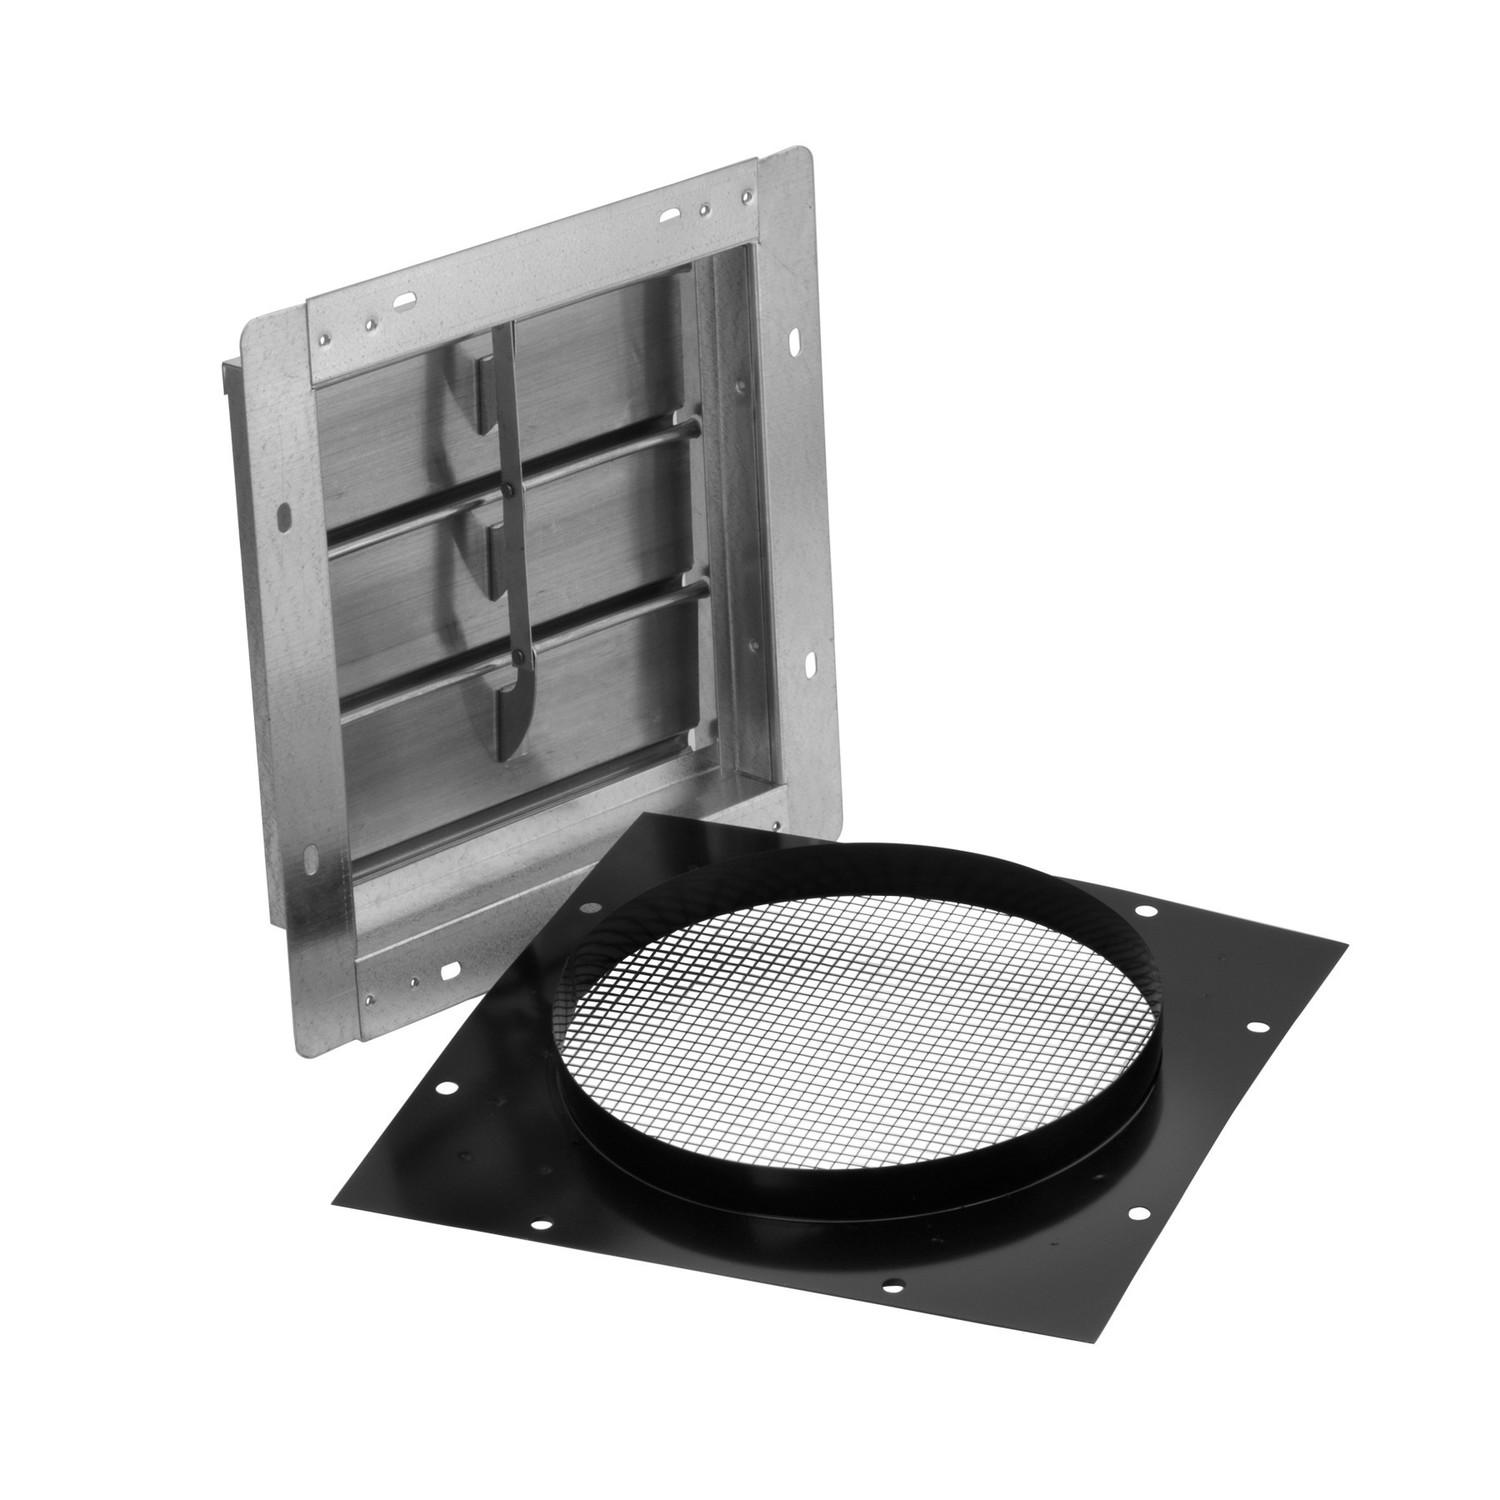 Broan-NuTone(R) 10-Inch Wall Cap for Range Hoods and Bath Ventilation Fans